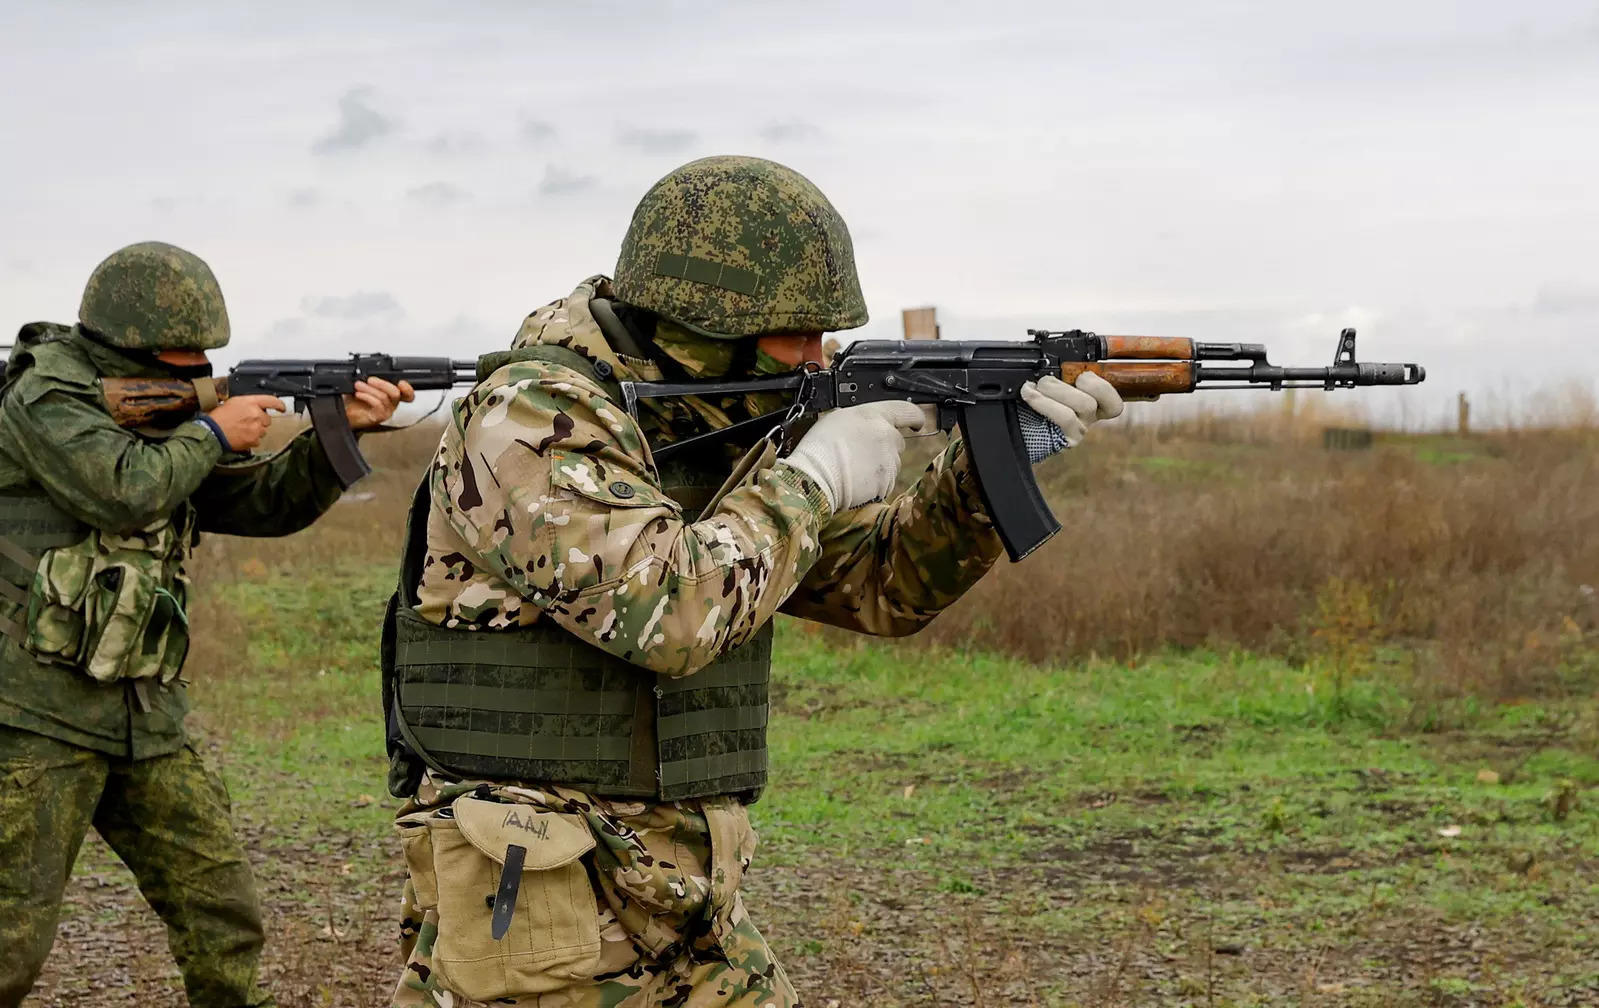 Russian newly-mobilised reservists train at a shooting range in the course of Russia-Ukraine conflict in the Donetsk region, Russian-controlled Ukraine.